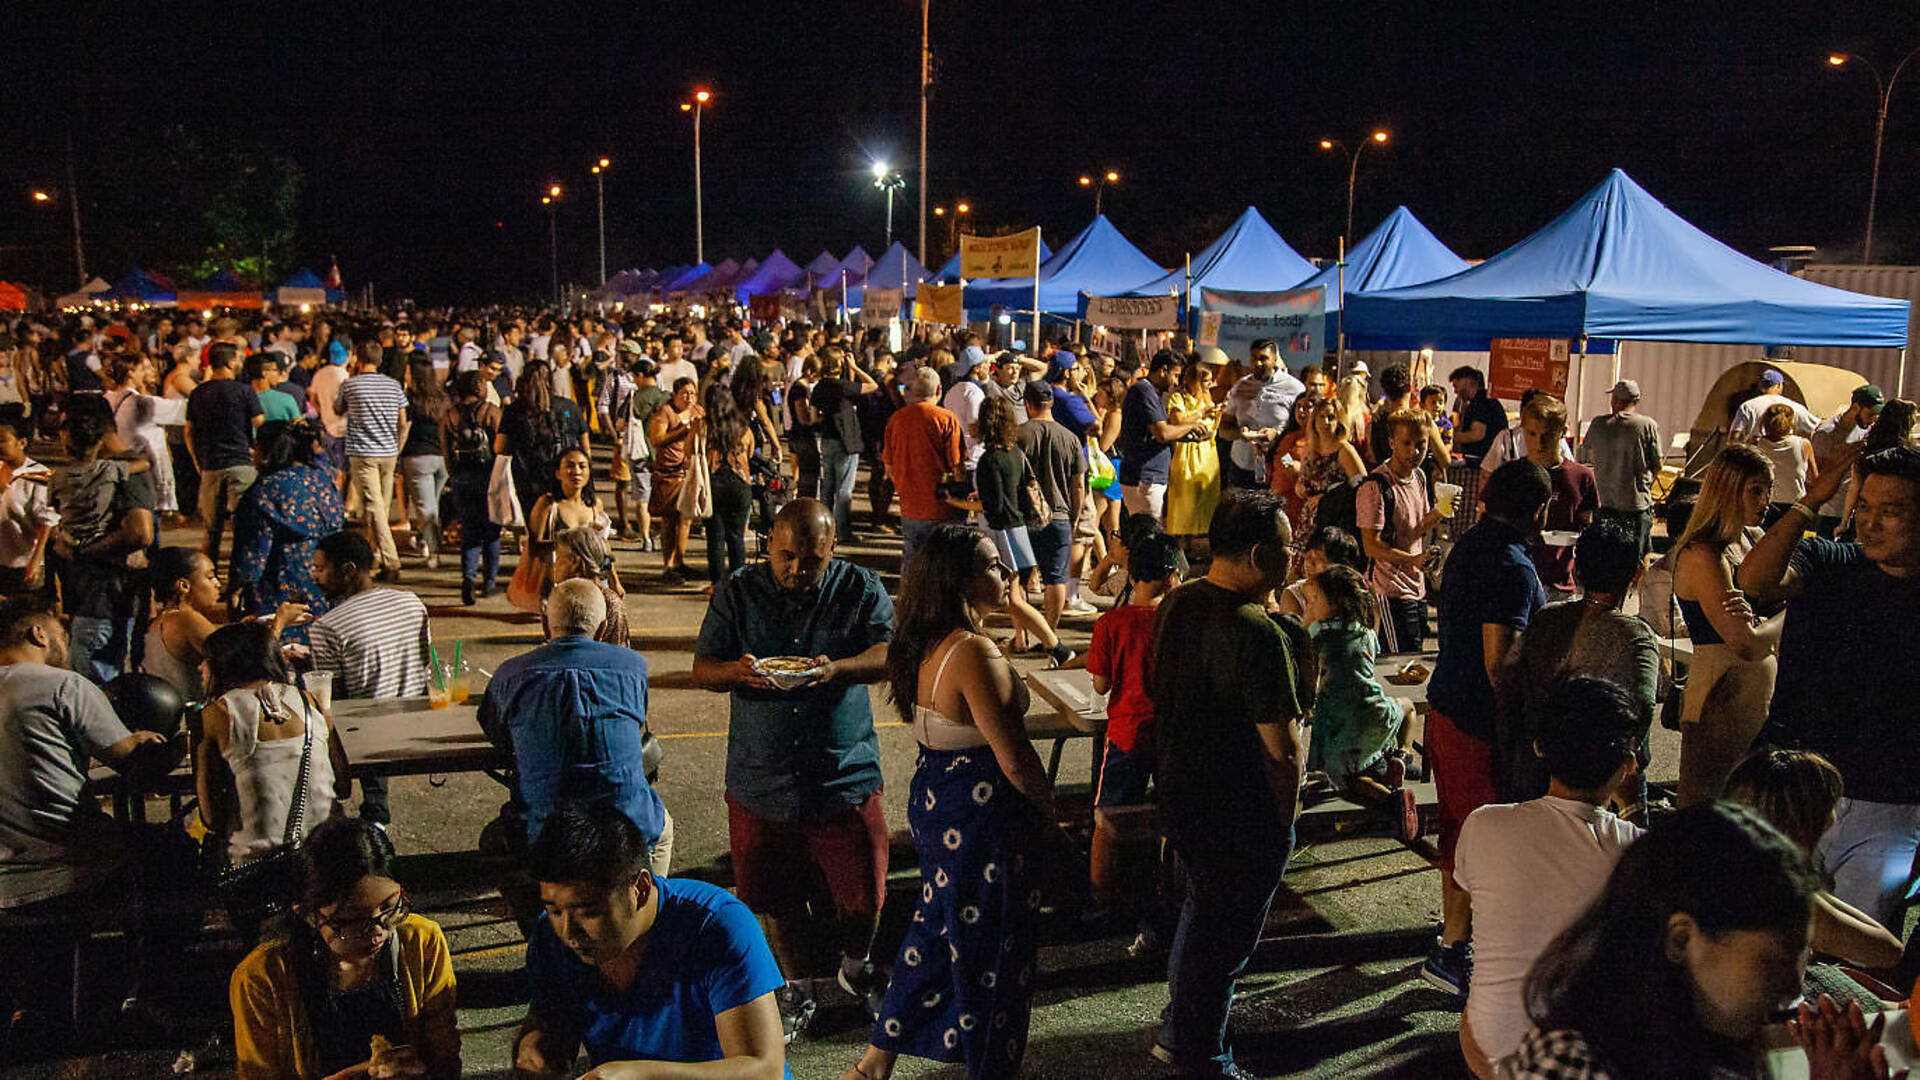 Queens Night Market celebrates NYC immigrants in citywide series